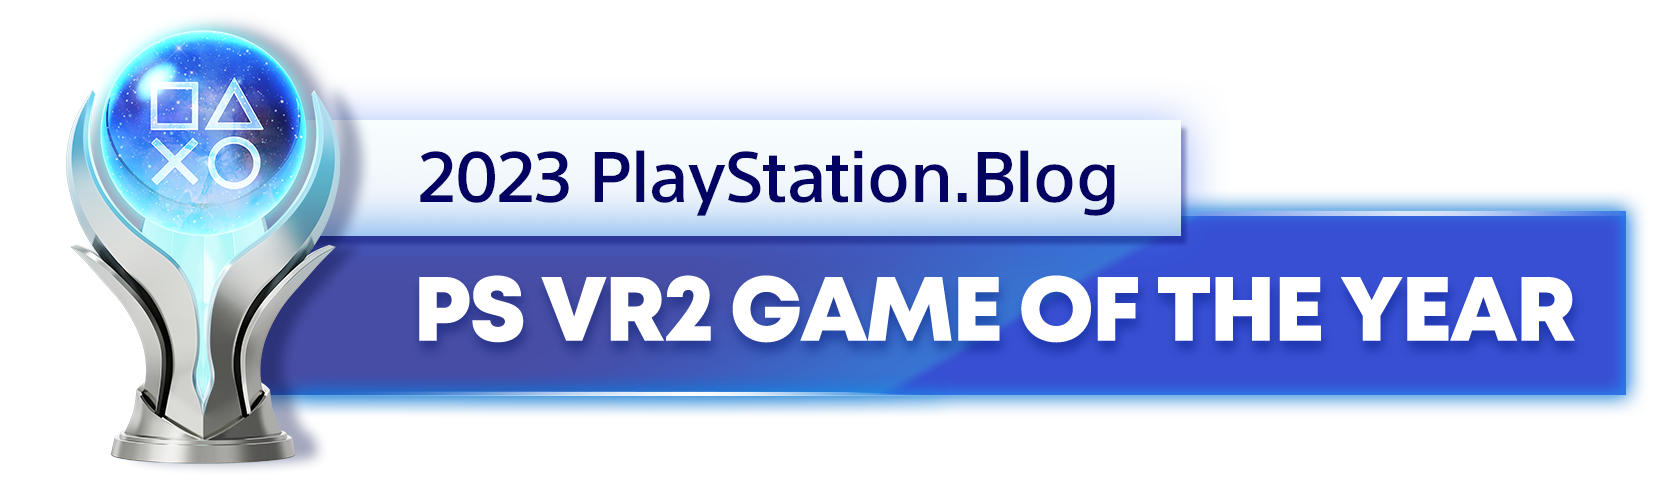  "Platinum Trophy for the 2023 PlayStation Blog PS VR2 Game of the Year Winner"